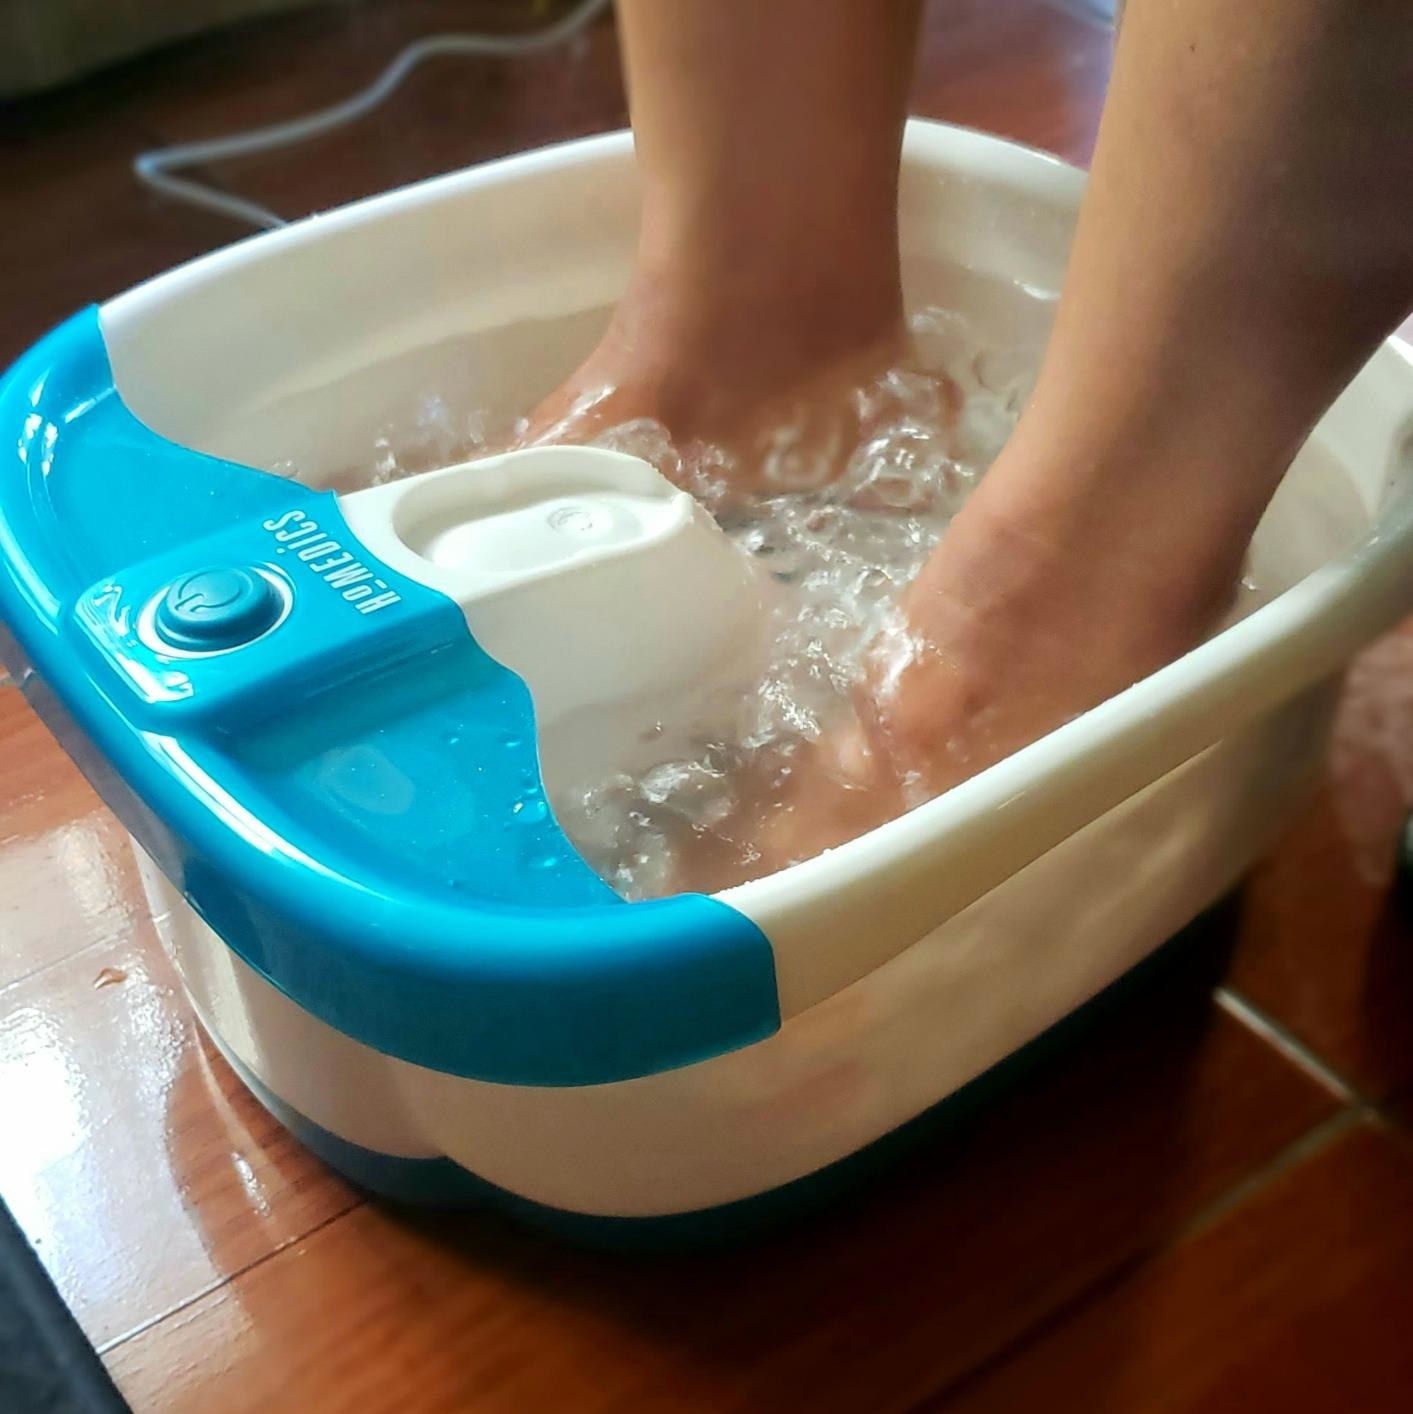 Reviewer photo of their feet soaking in the foot spa tub